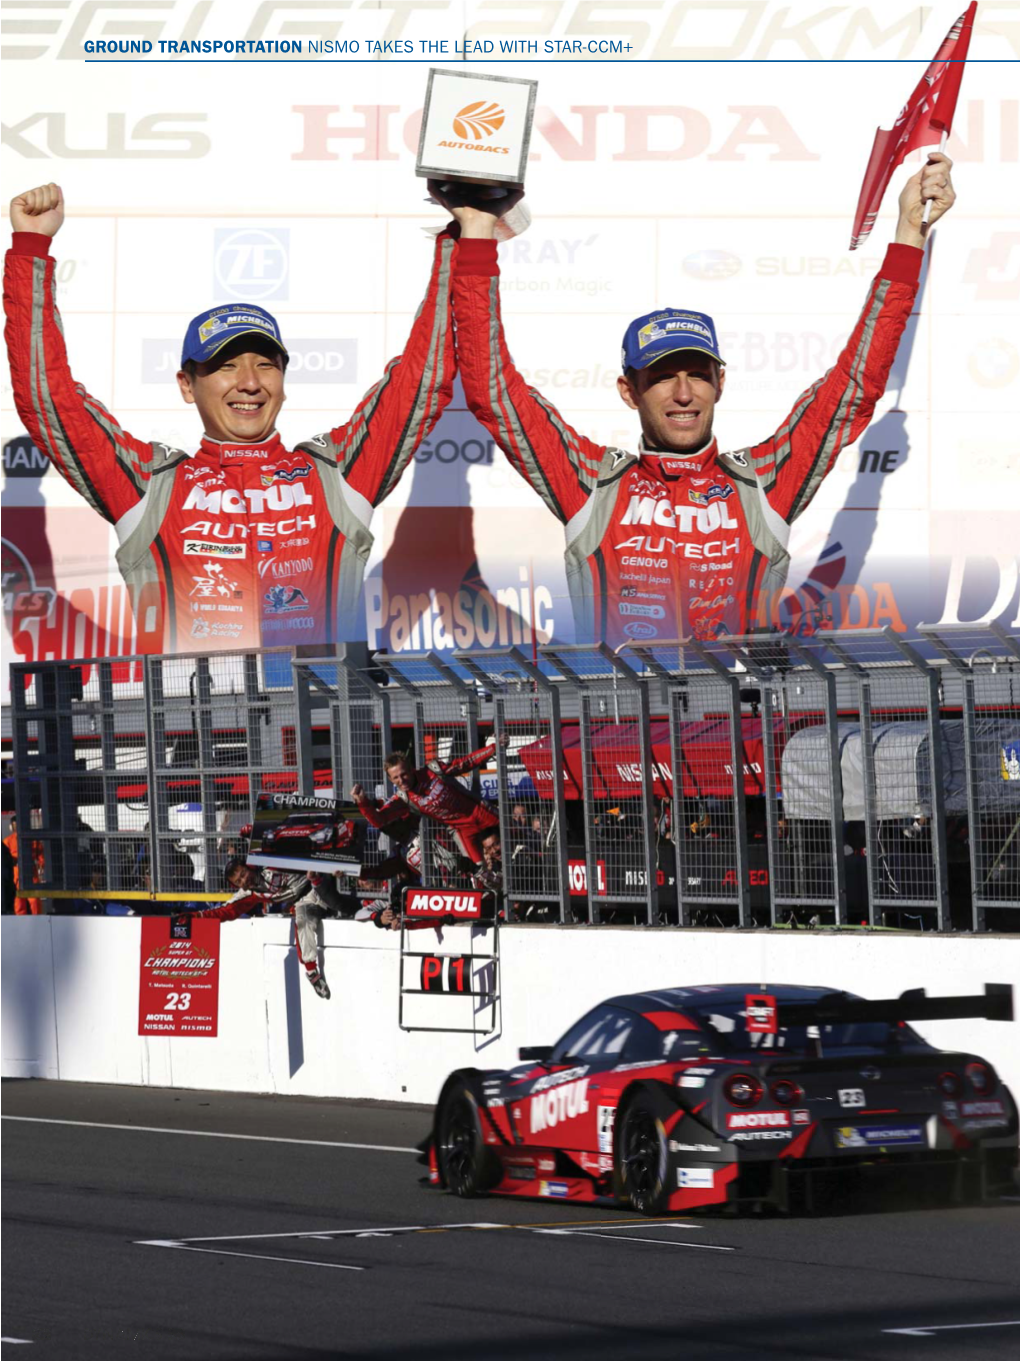 52 Ground Transportation Nismo Takes the Lead With